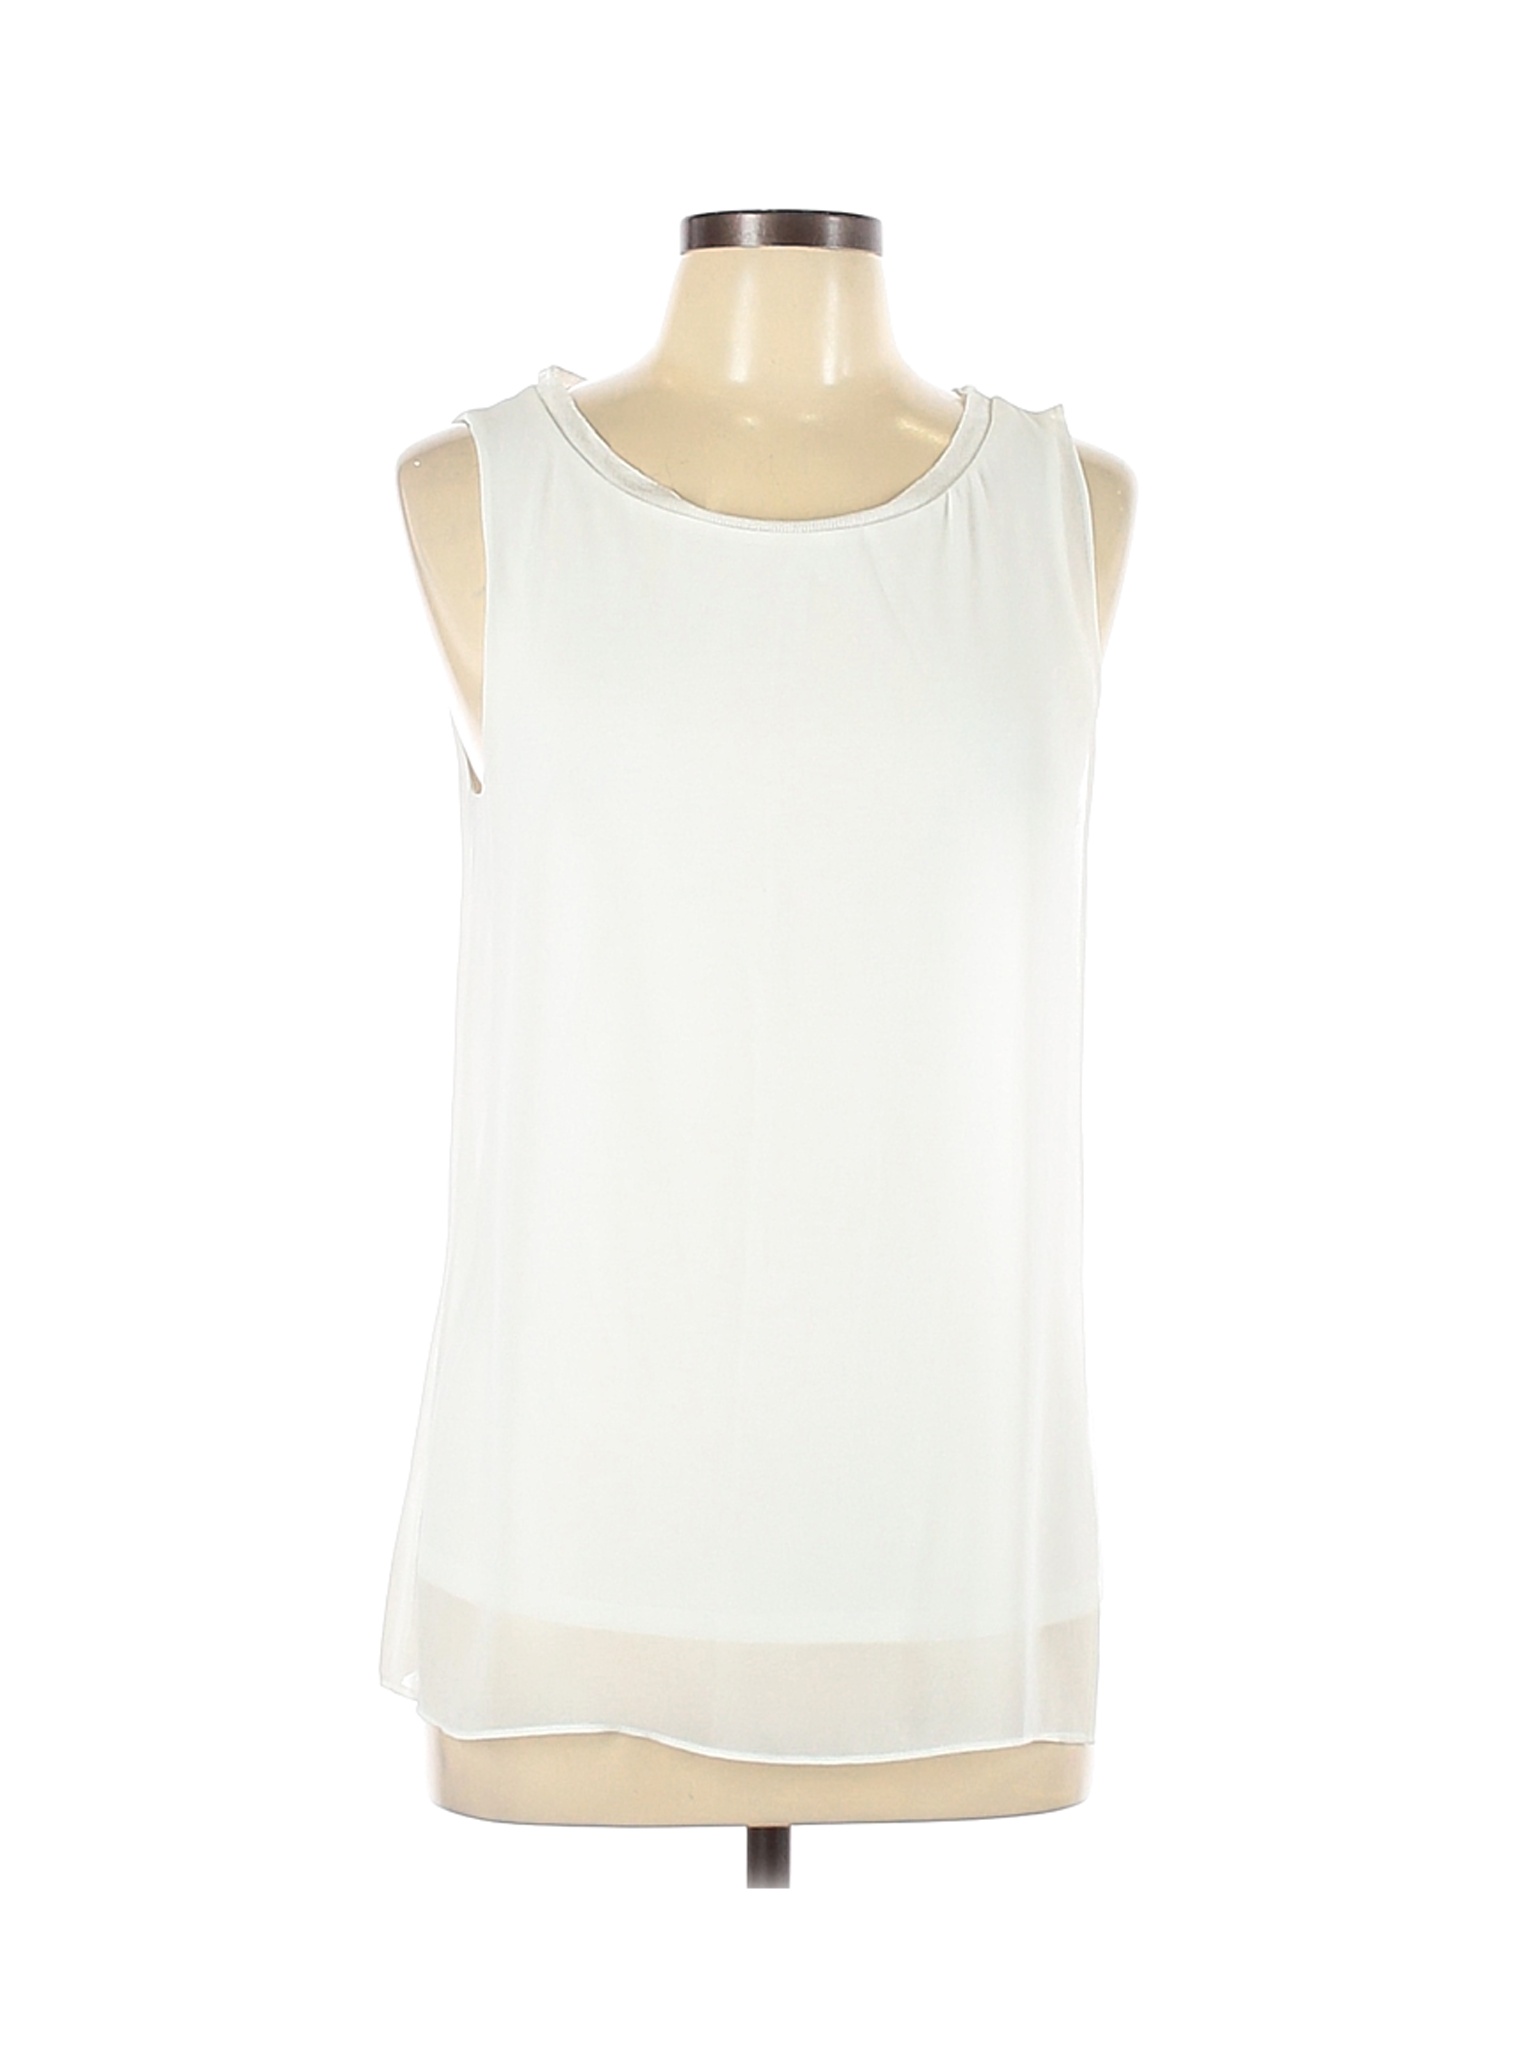 Ellen Tracy 100% Polyester Solid White Sleeveless Blouse Size L - 75% ...